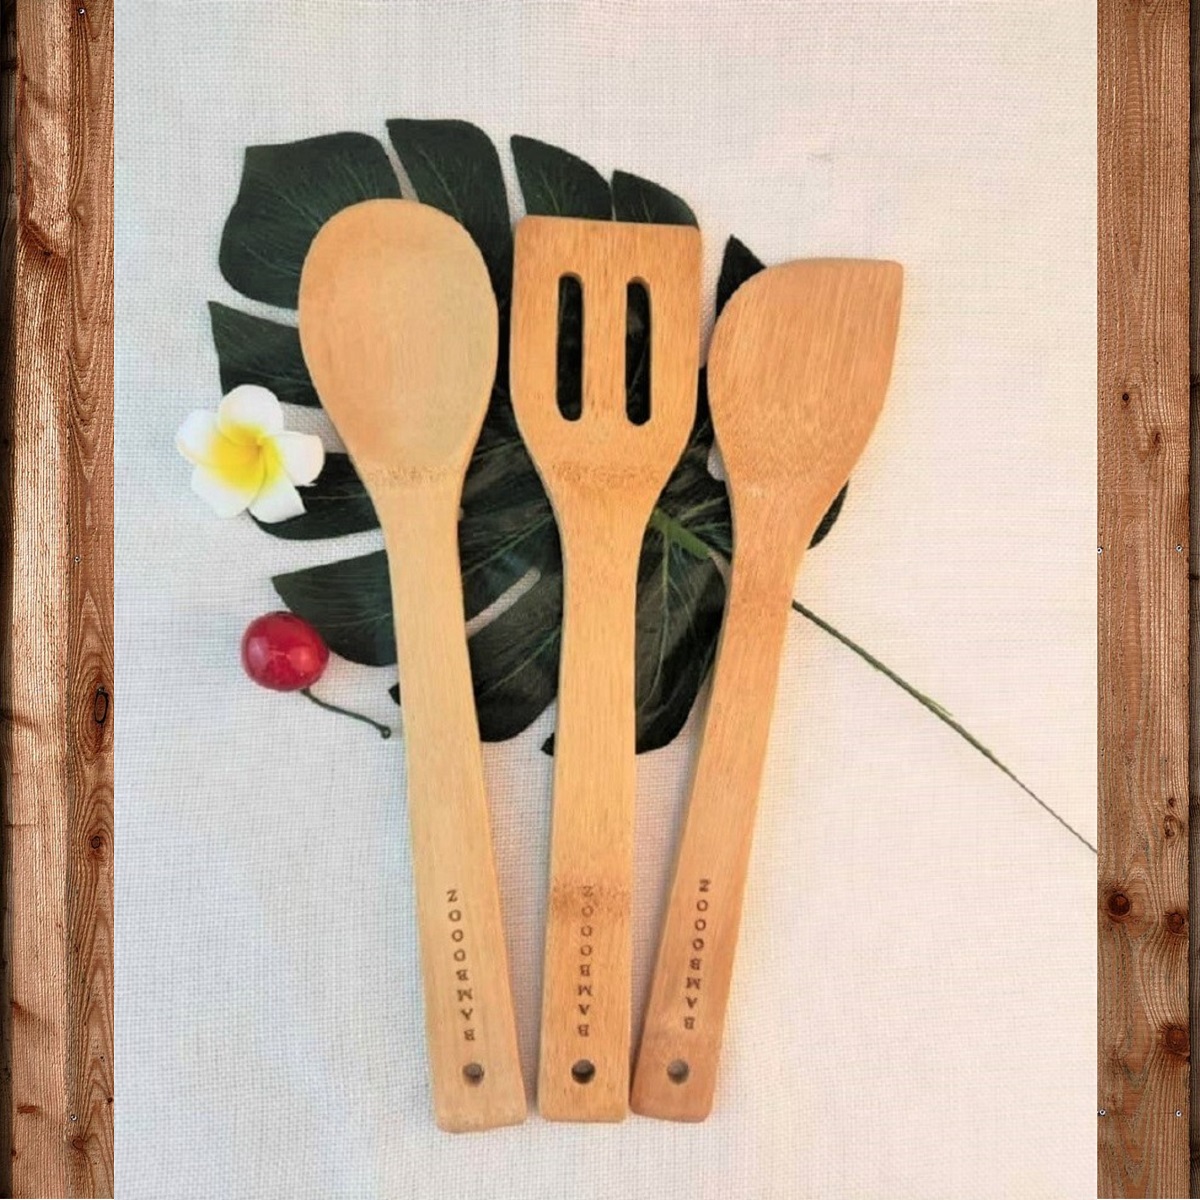 We are Pioneer in Bamboo made Value Added Products in India.  #bamboo #homeware #kitchenware #HealthyLiving #healthylifestyle #greenproducts #environment #Bengaluru @bamboooz99 @indrani11 
Shop bambooproducts.in
Bulk order-furnbambu@gmail.com